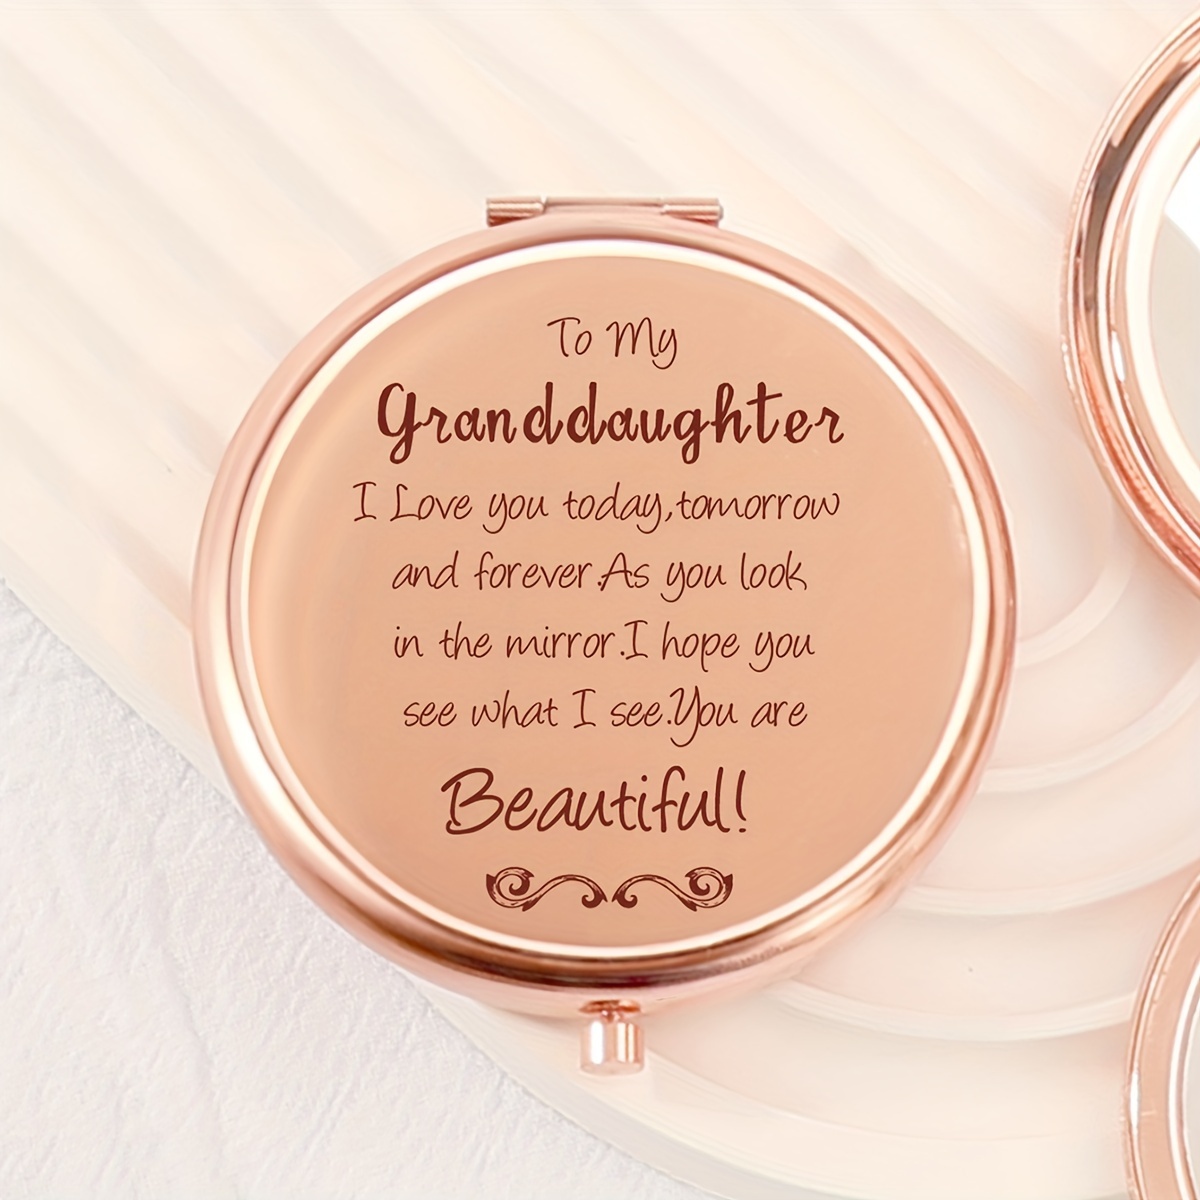 

To My Granddaughter Makeup Mirror - Perfect Gift For Birthday, Christmas, Graduation For Granddaughters - Great Quality Compact Size For On-the-go 1pc - Mother's Day Makeup Mirror